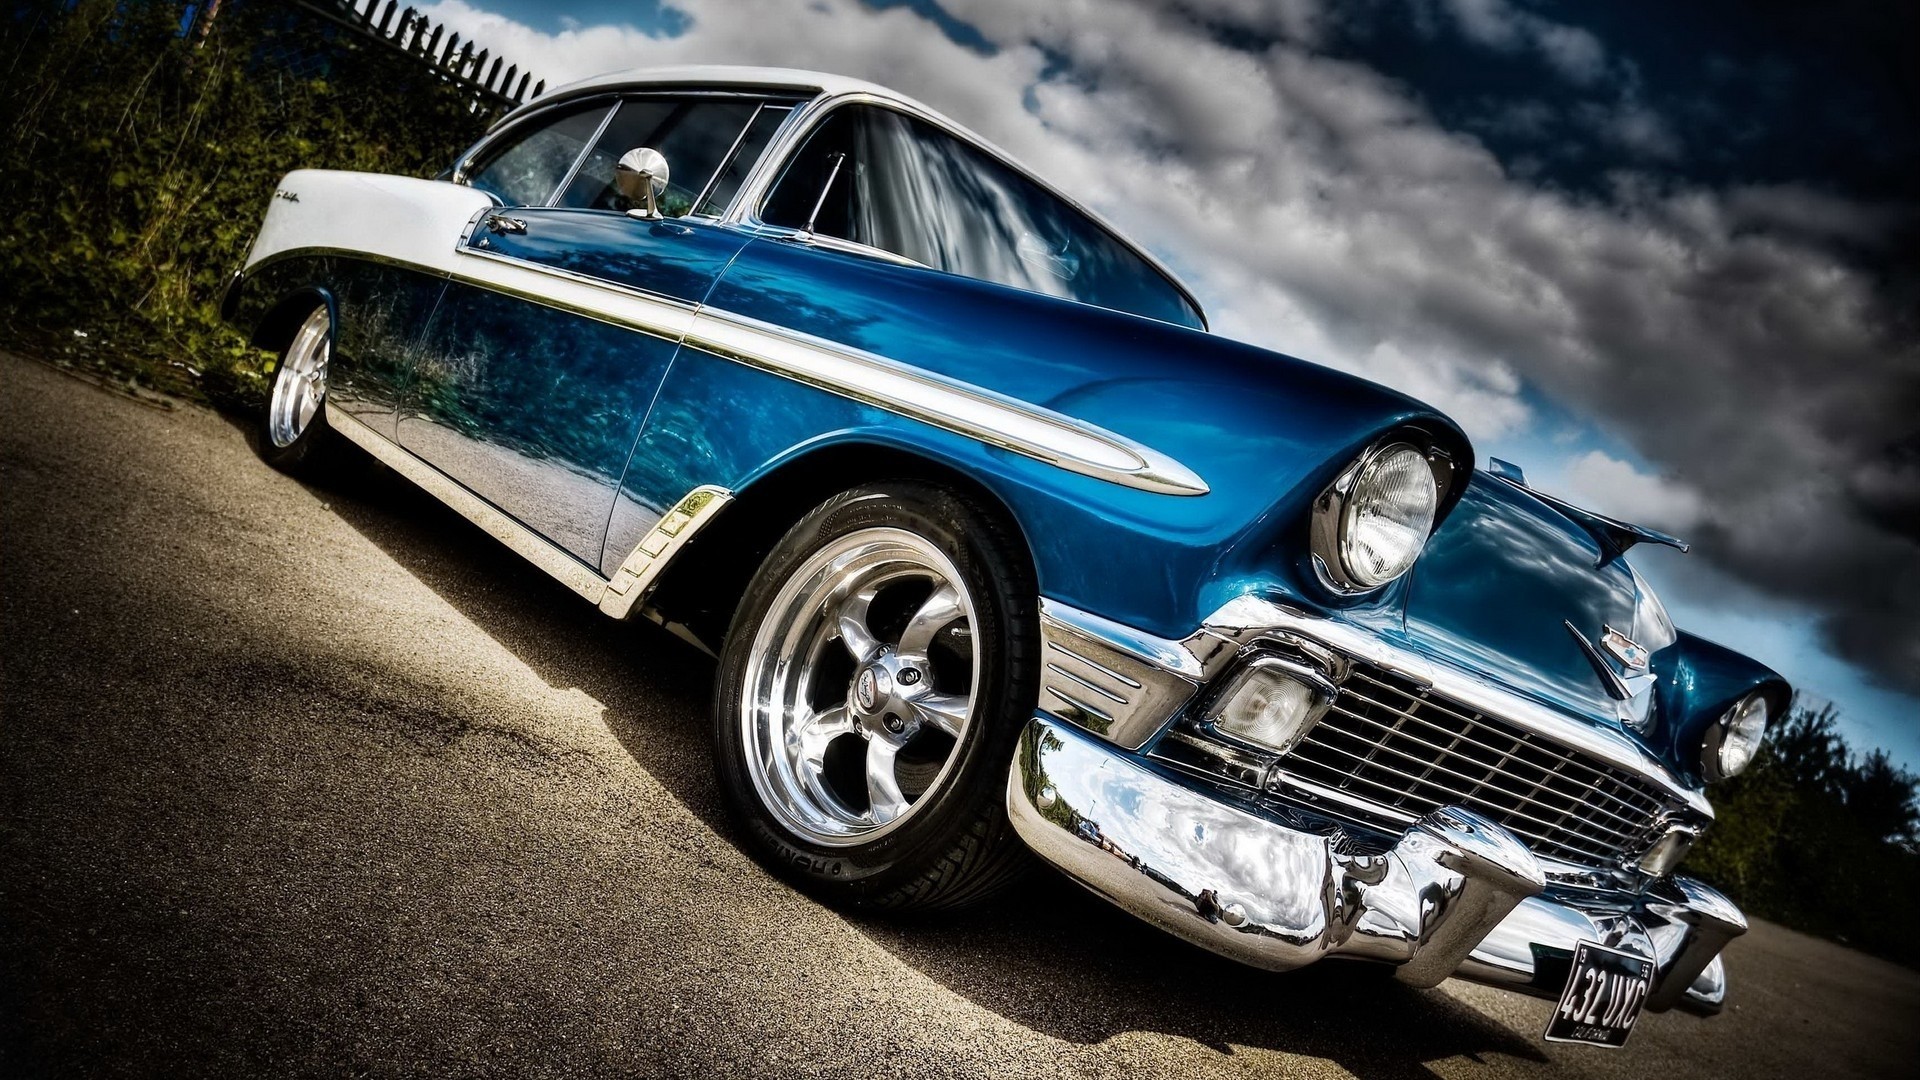 Blue Chevy HD Wallpaper Download Photos Free Amazing High